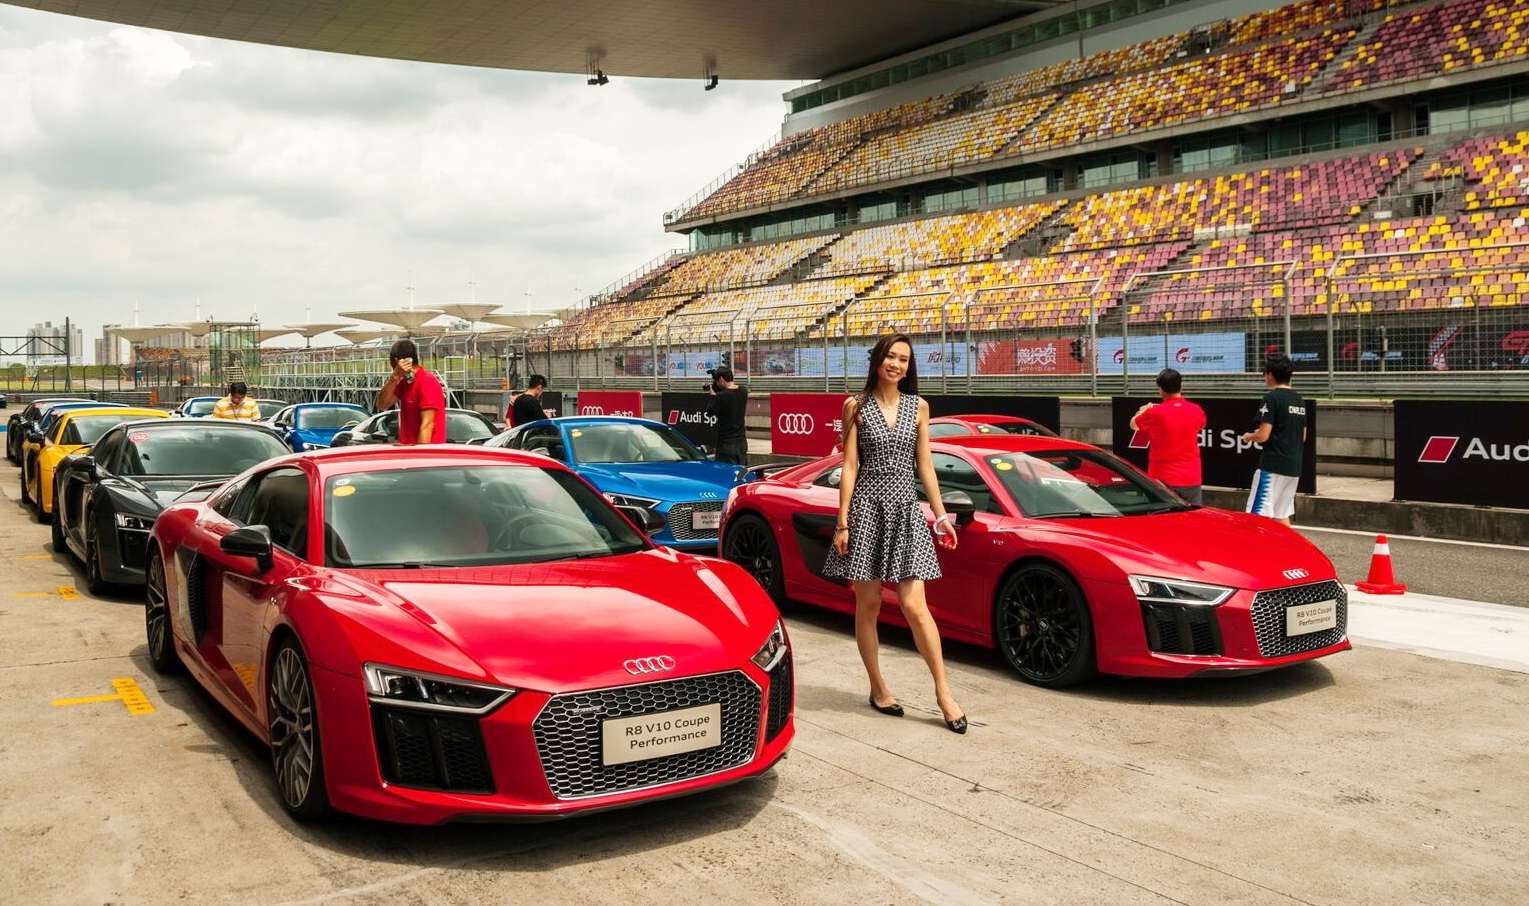 The Audi R8 V10 Coupe Performance cars at the starting line of the Shanghai International Circuit during an Audi customer race day in July. Photo: SCMP Pictures